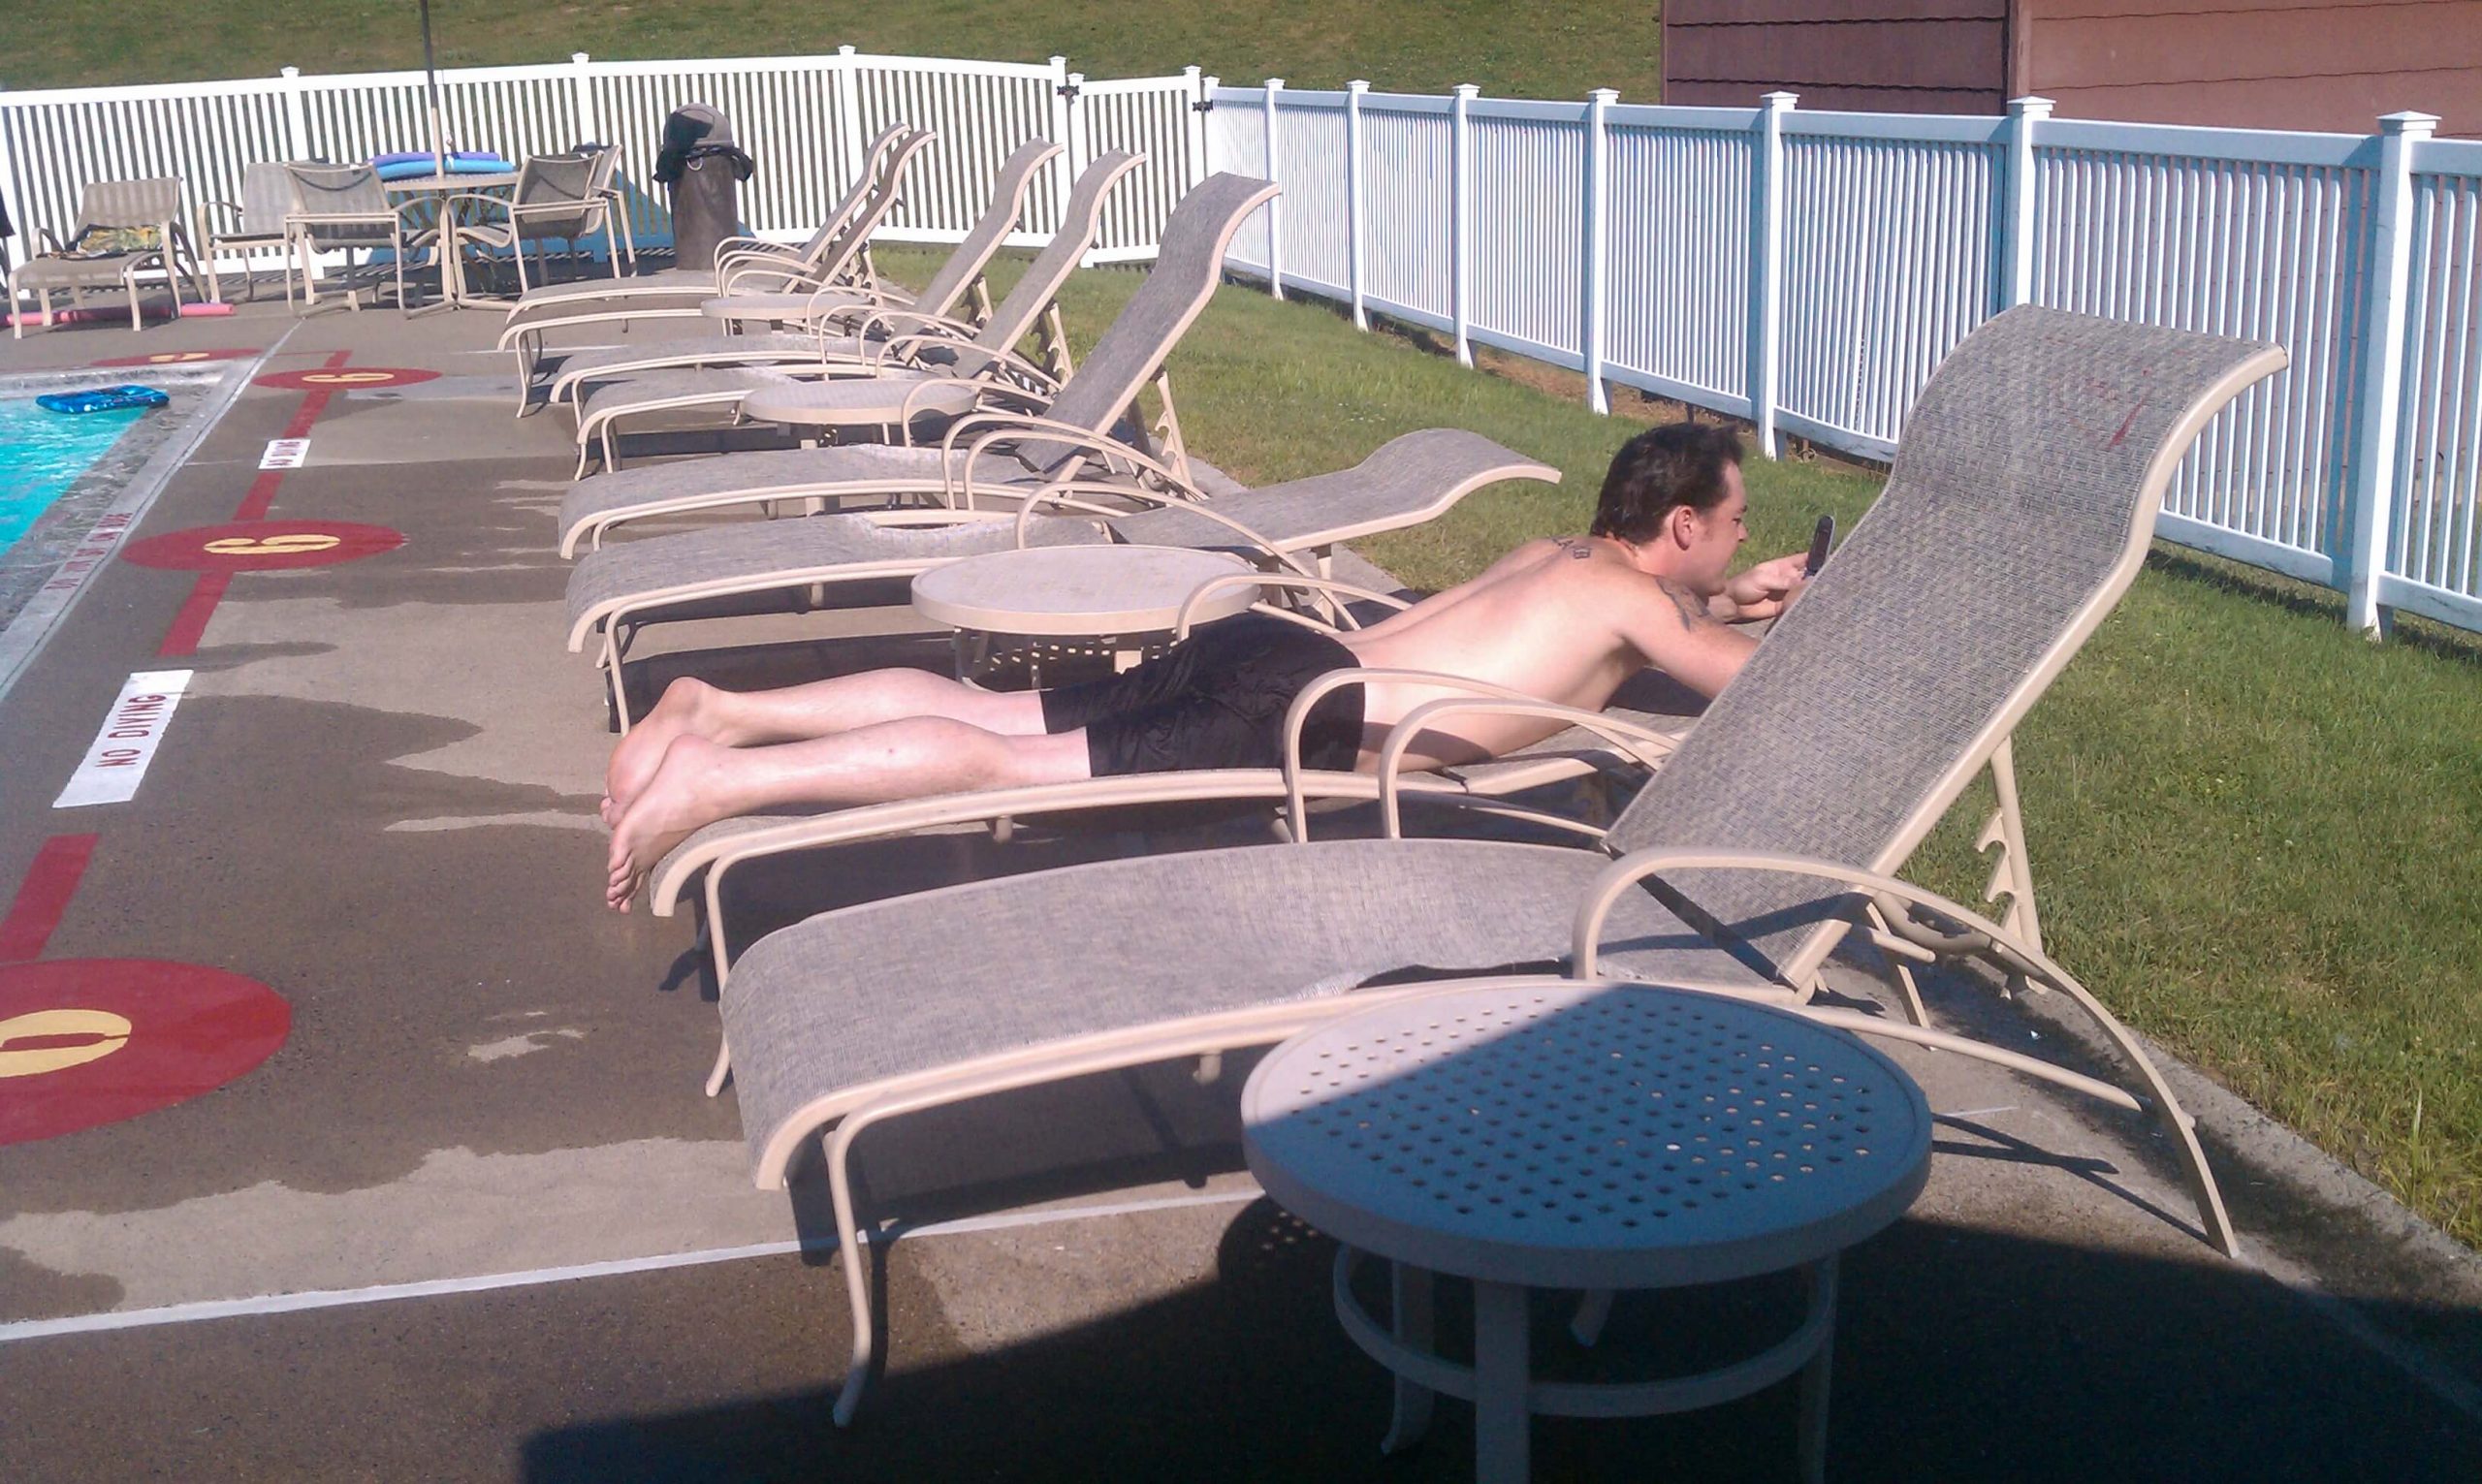 Justin catching some rays by the pool with some friends....